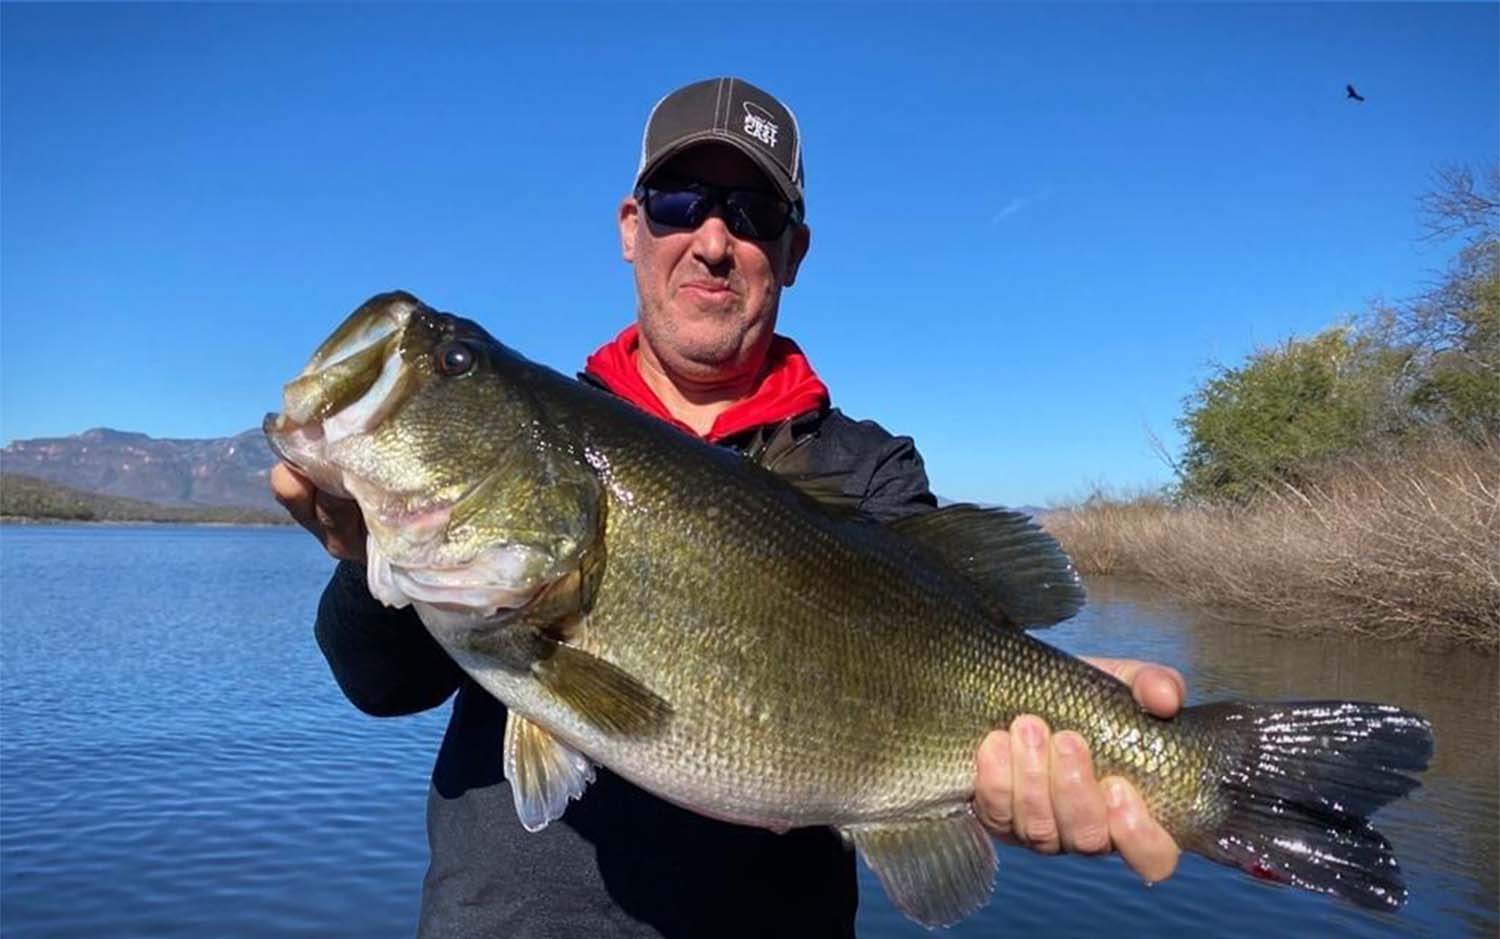 The Best Fishing Lines for Bass of 2022